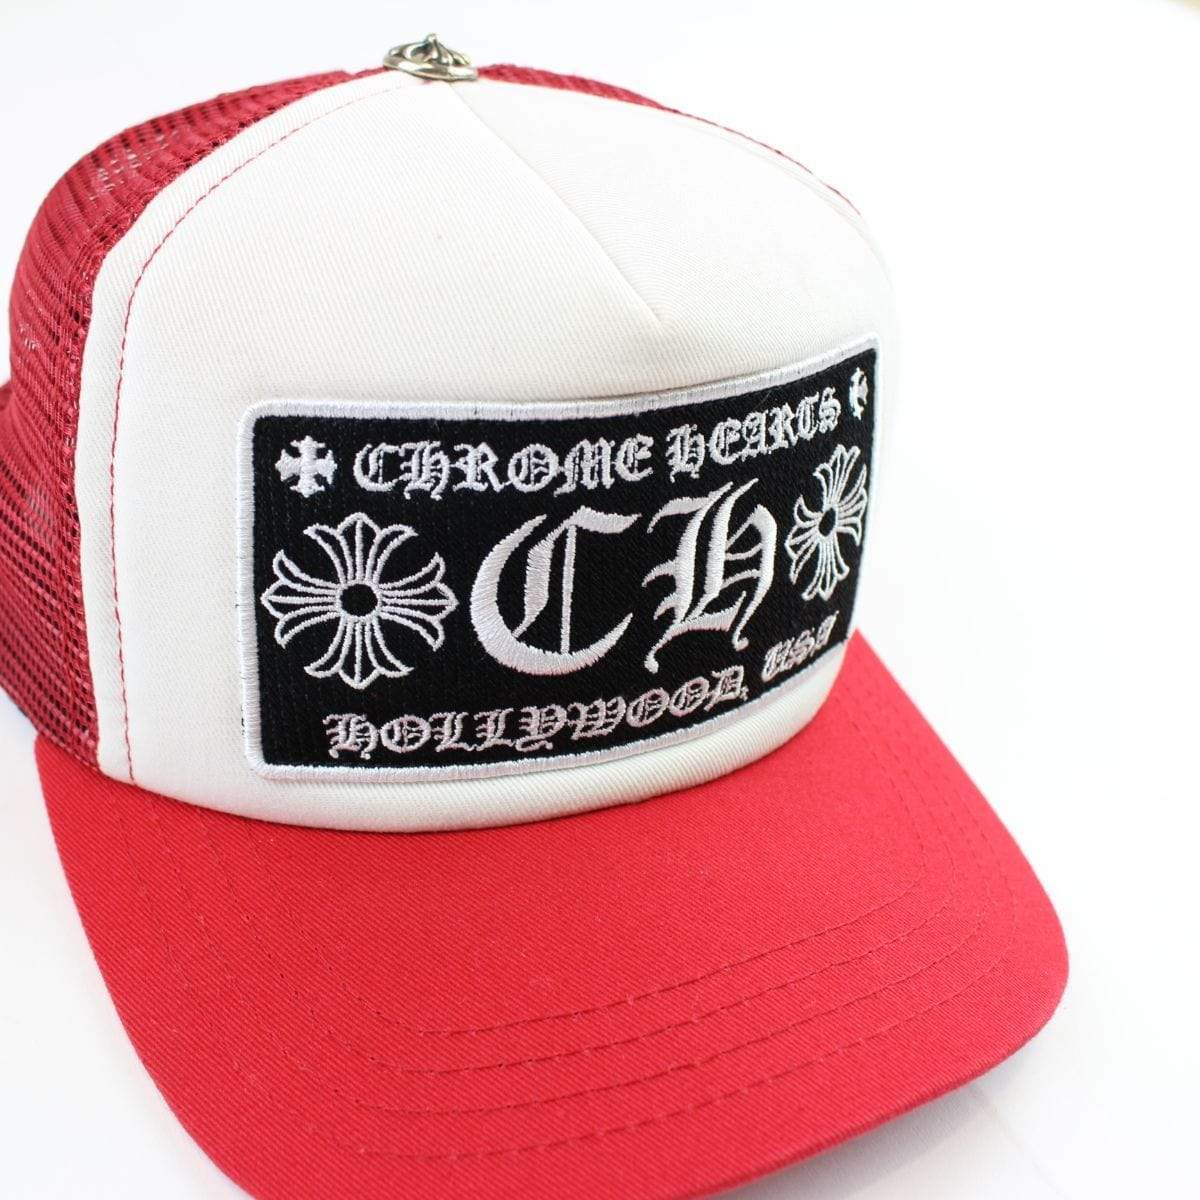 chrome hearts trucker hat red - SaruGeneral